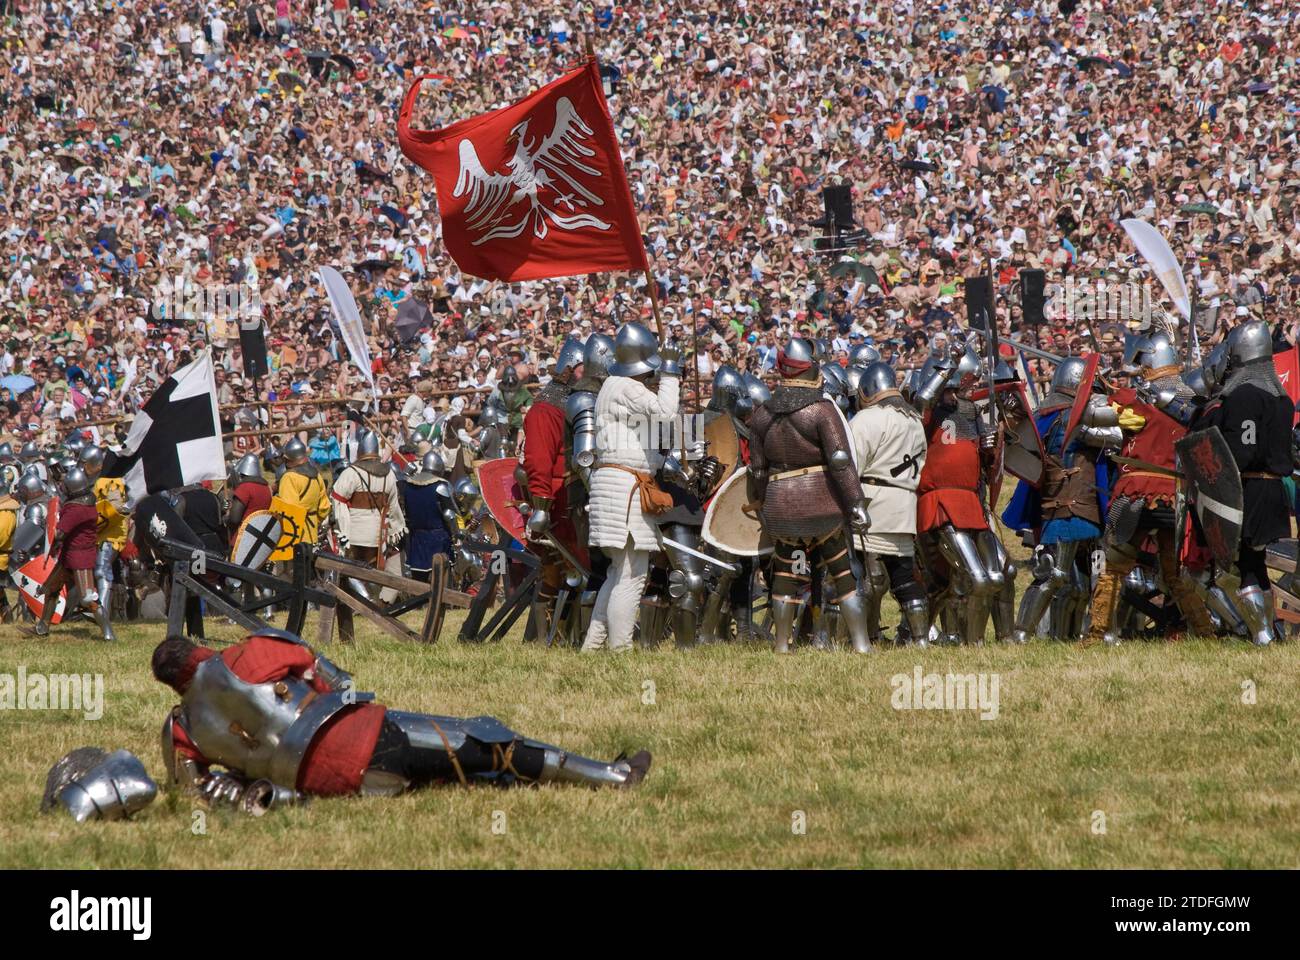 Reenactors and spectators at annual recreation of Battle of Grunwald which took place in 1410 when Polish and Lithuanian troops broke the power of Teutonic Knights, near village of Grunwald Warminsko-Mazurskie, Poland Stock Photo